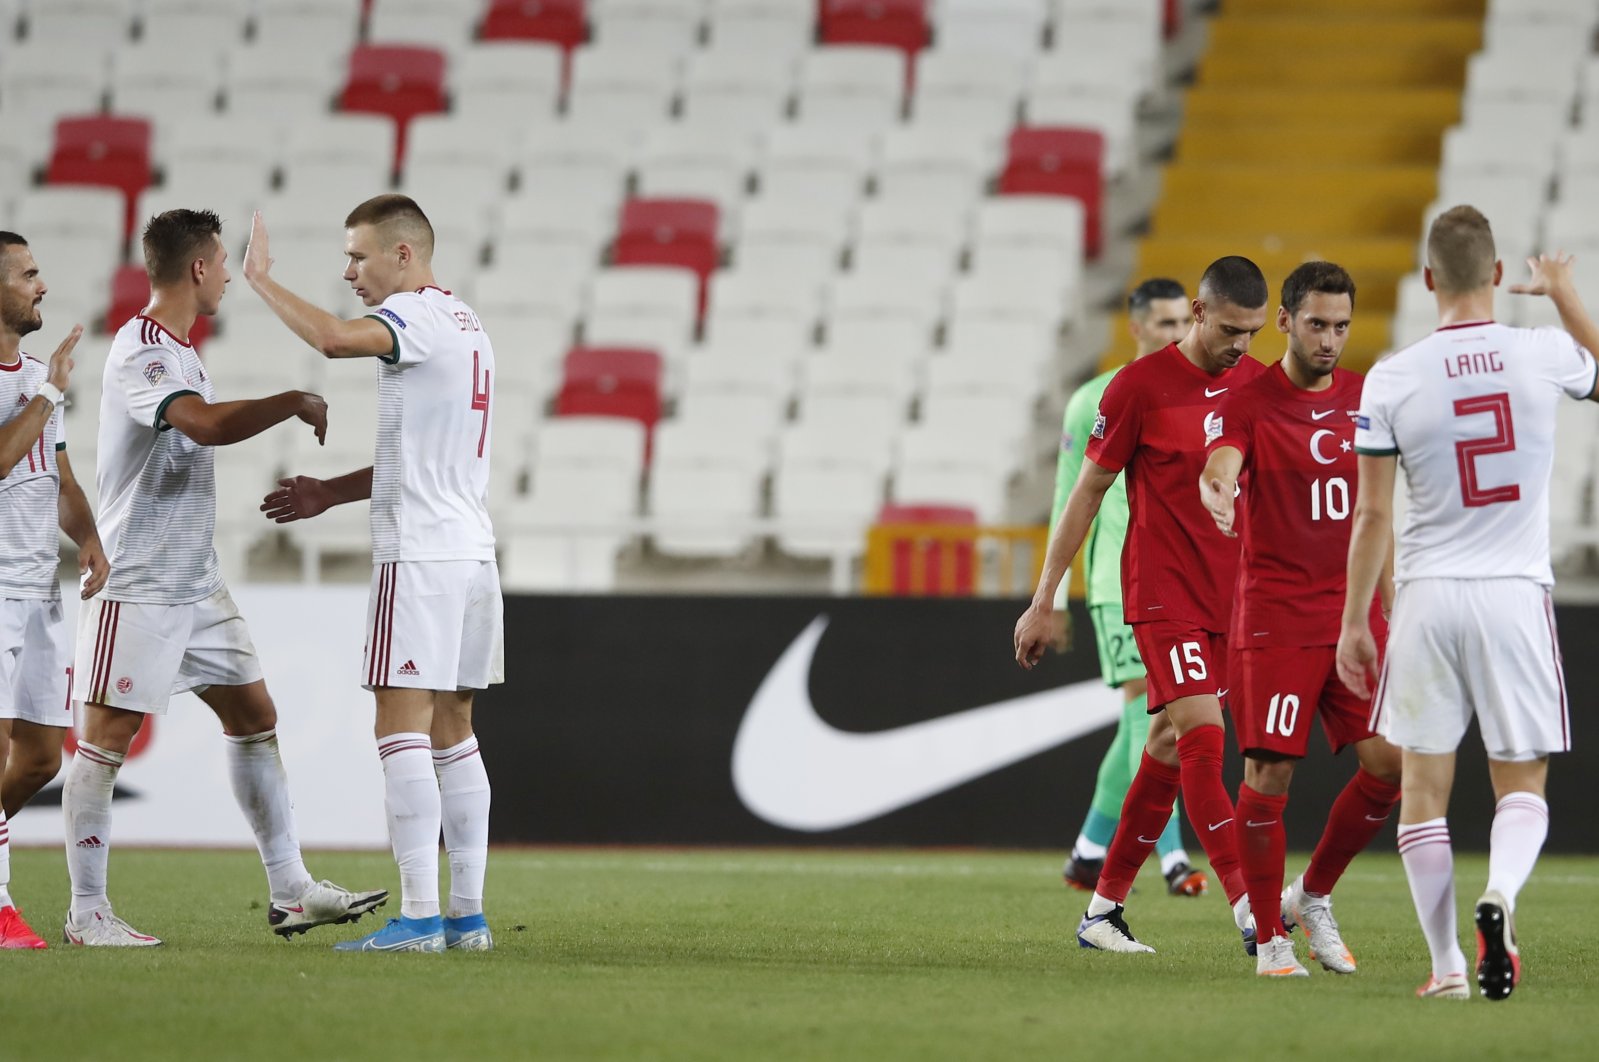 Hungary players celebrate after their win against Turkey in the UEFA Nations League match at the Yeni Sivas 4 Eylül Stadium, Sivas, central Turkey. Sept. 3, 2020. (Reuters Photo)